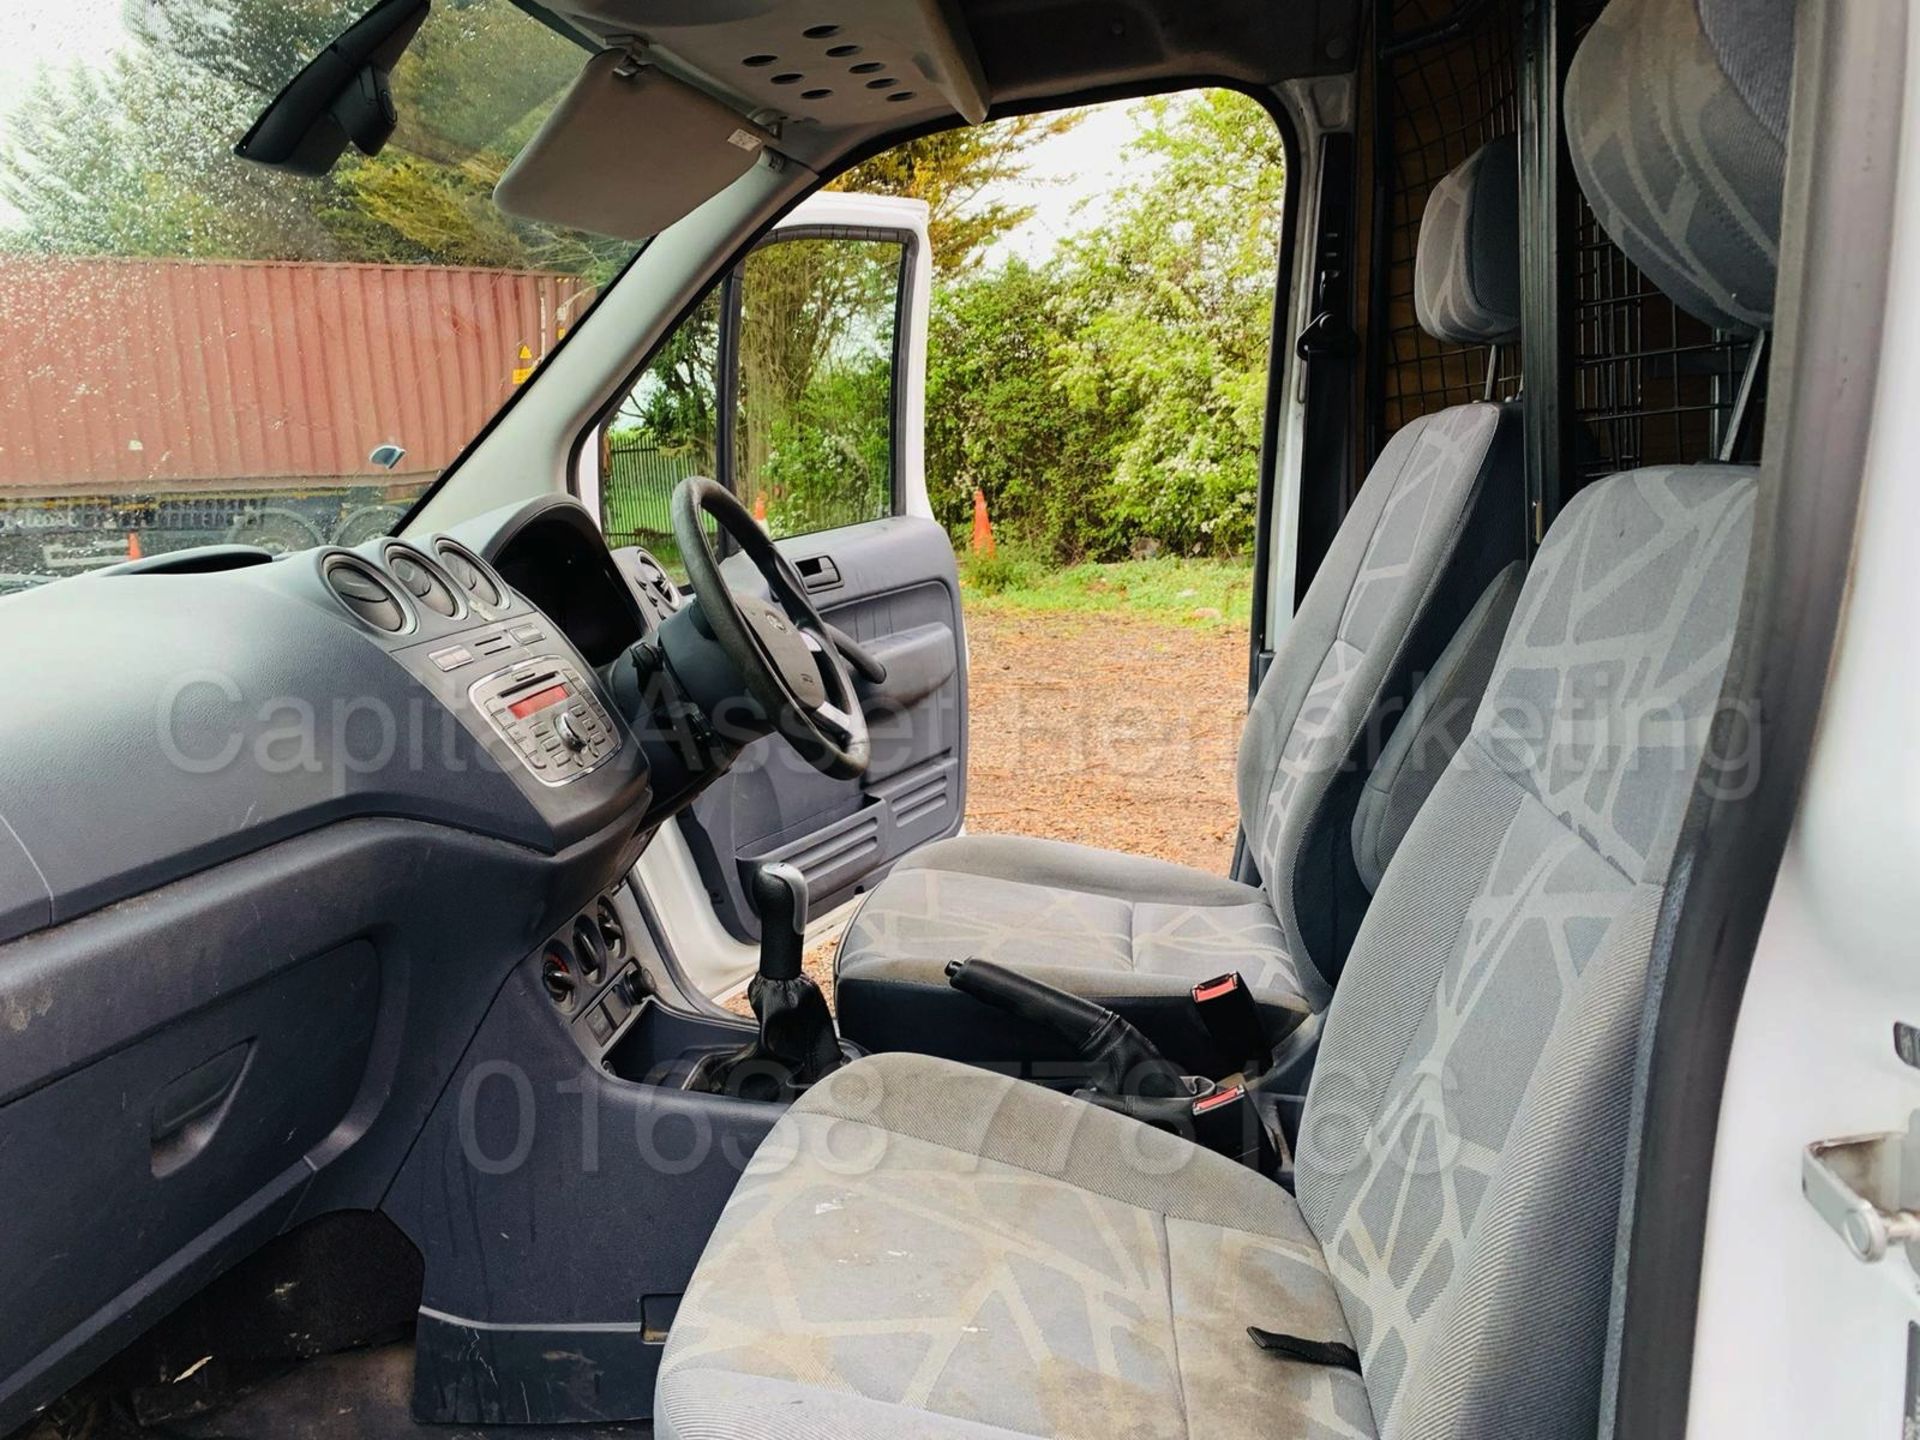 FORD TRANSIT CONNECT 90 T230 *TREND EDITION* 'LWB HI-ROOF' (2012) '1.8 TDCI - 90 BHP - 5 SPEED' - Image 17 of 22